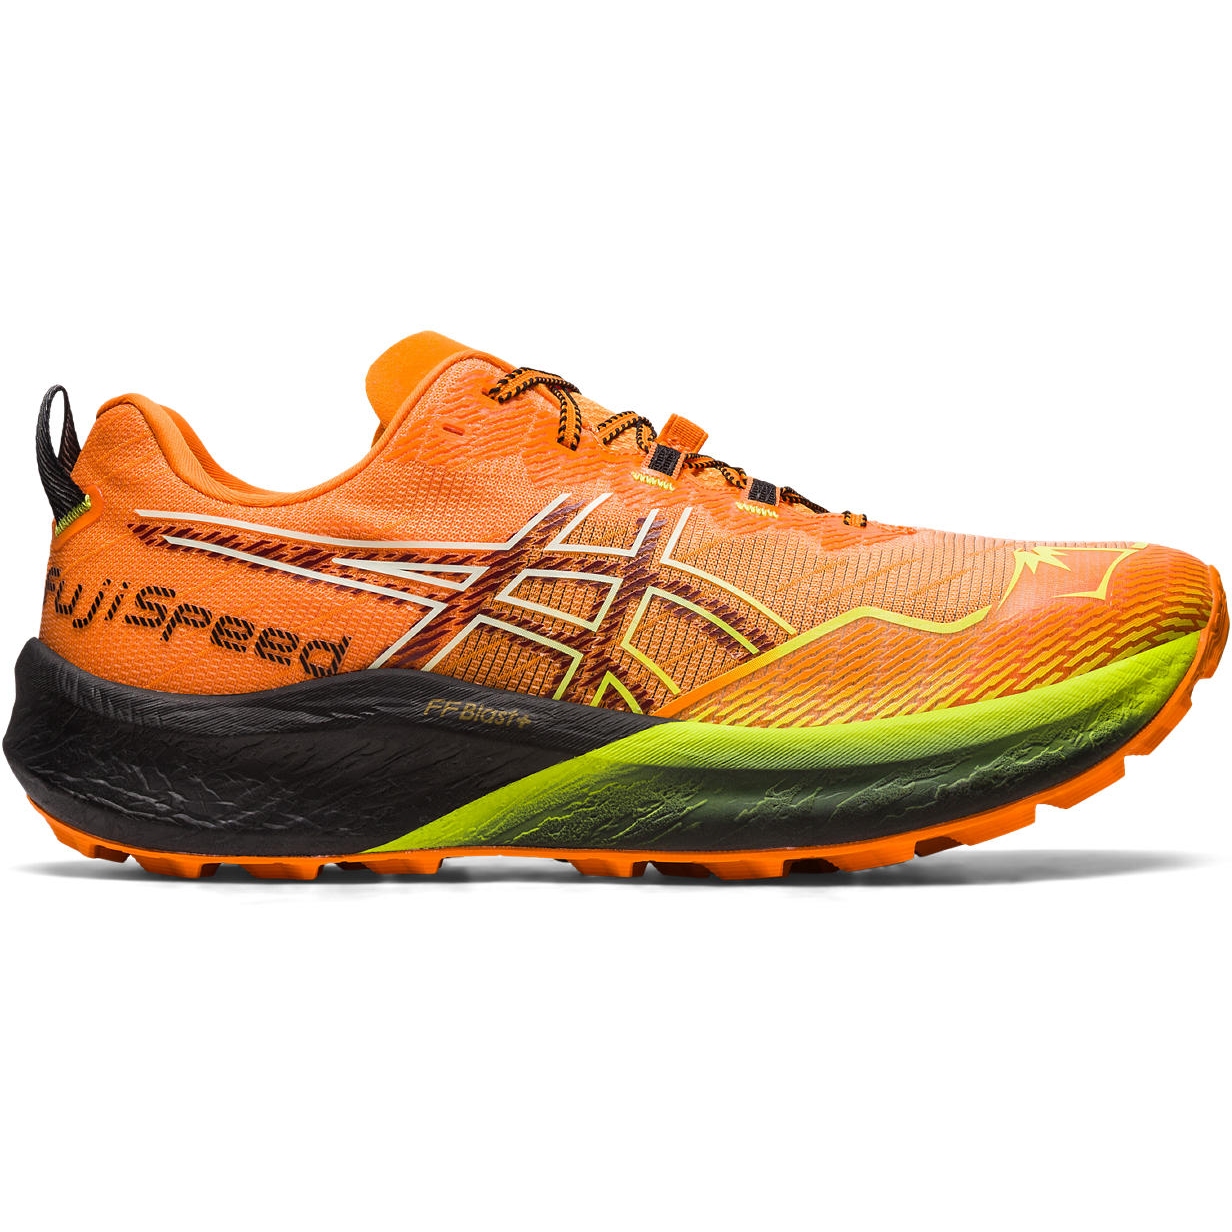 Picture of asics Fujispeed 2 Trail Running Shoes men - bright orange/antique red